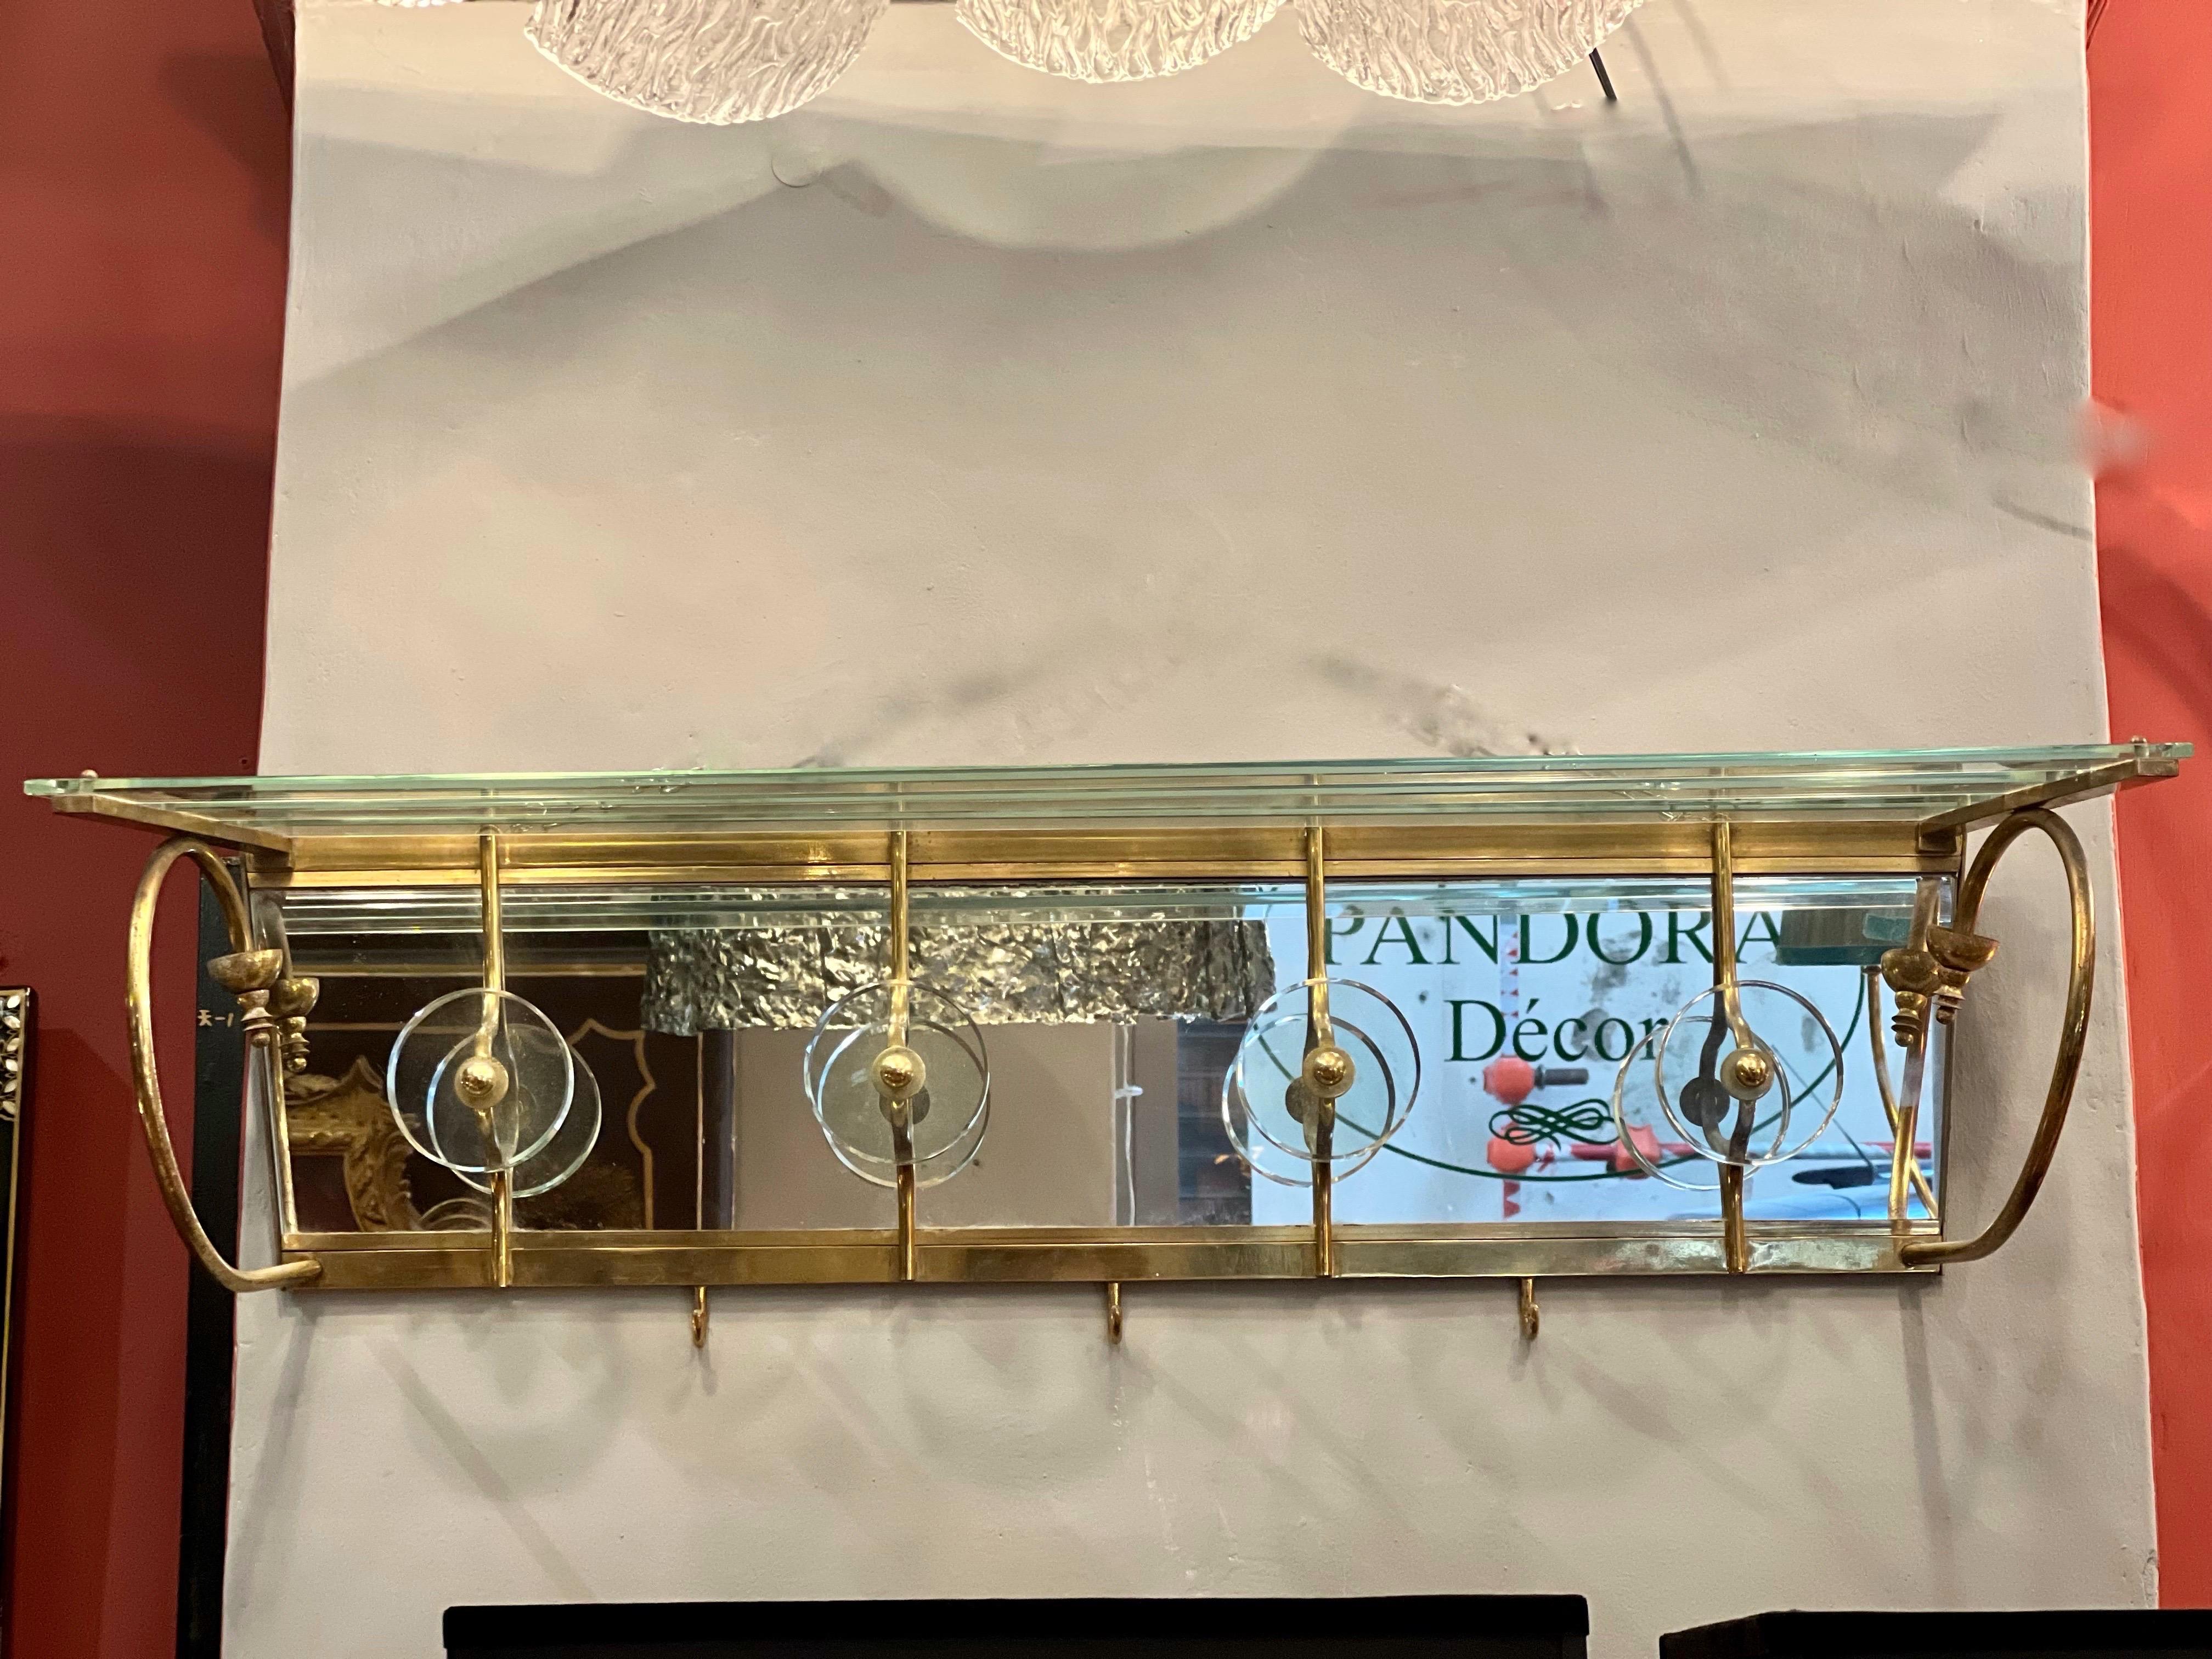 Vintage crystal and brass wall coat racks, midcentury era.
4 round crystal hooks and 3 brass hooks.
Very heigh decorative object.
Perfect vintage condition.

